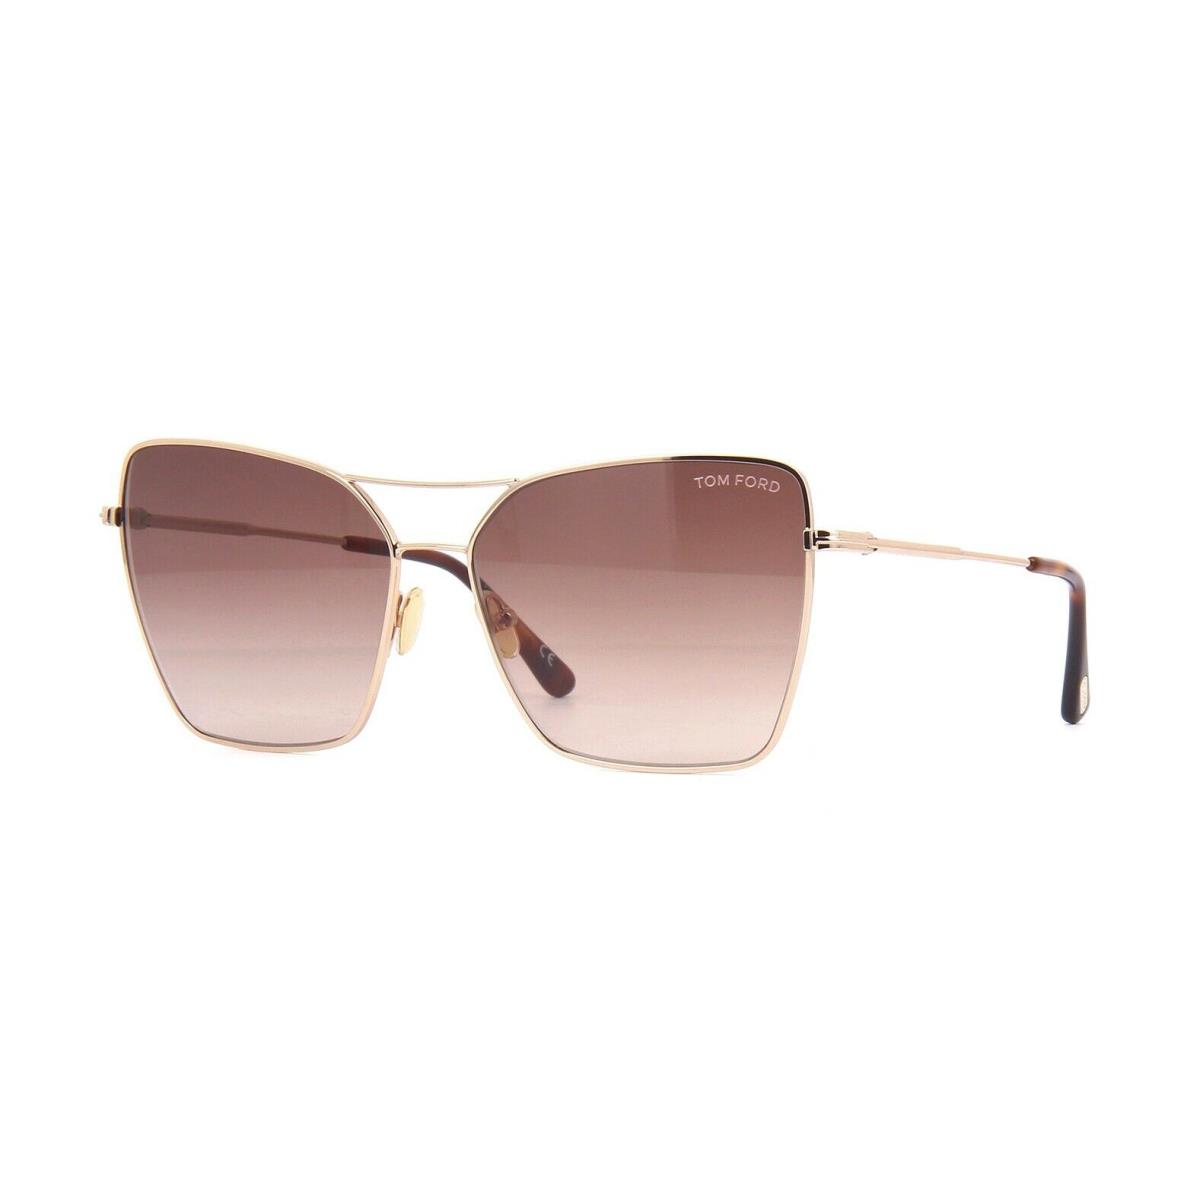 Tom Ford Sye Shiny Rose Gold / Brown-pink Gradient 61mm Sunglasses FT0738 28F 61